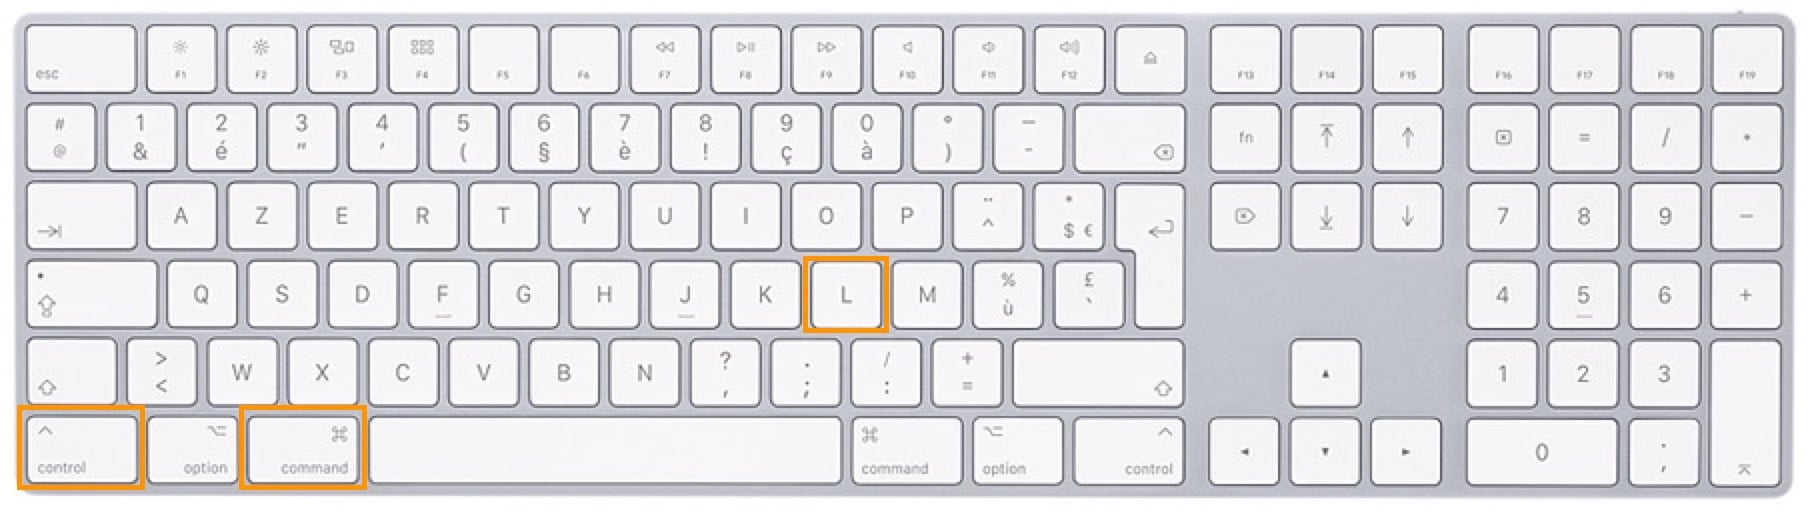 12 keyboard shortcuts you need to know for the Preview app on macOS